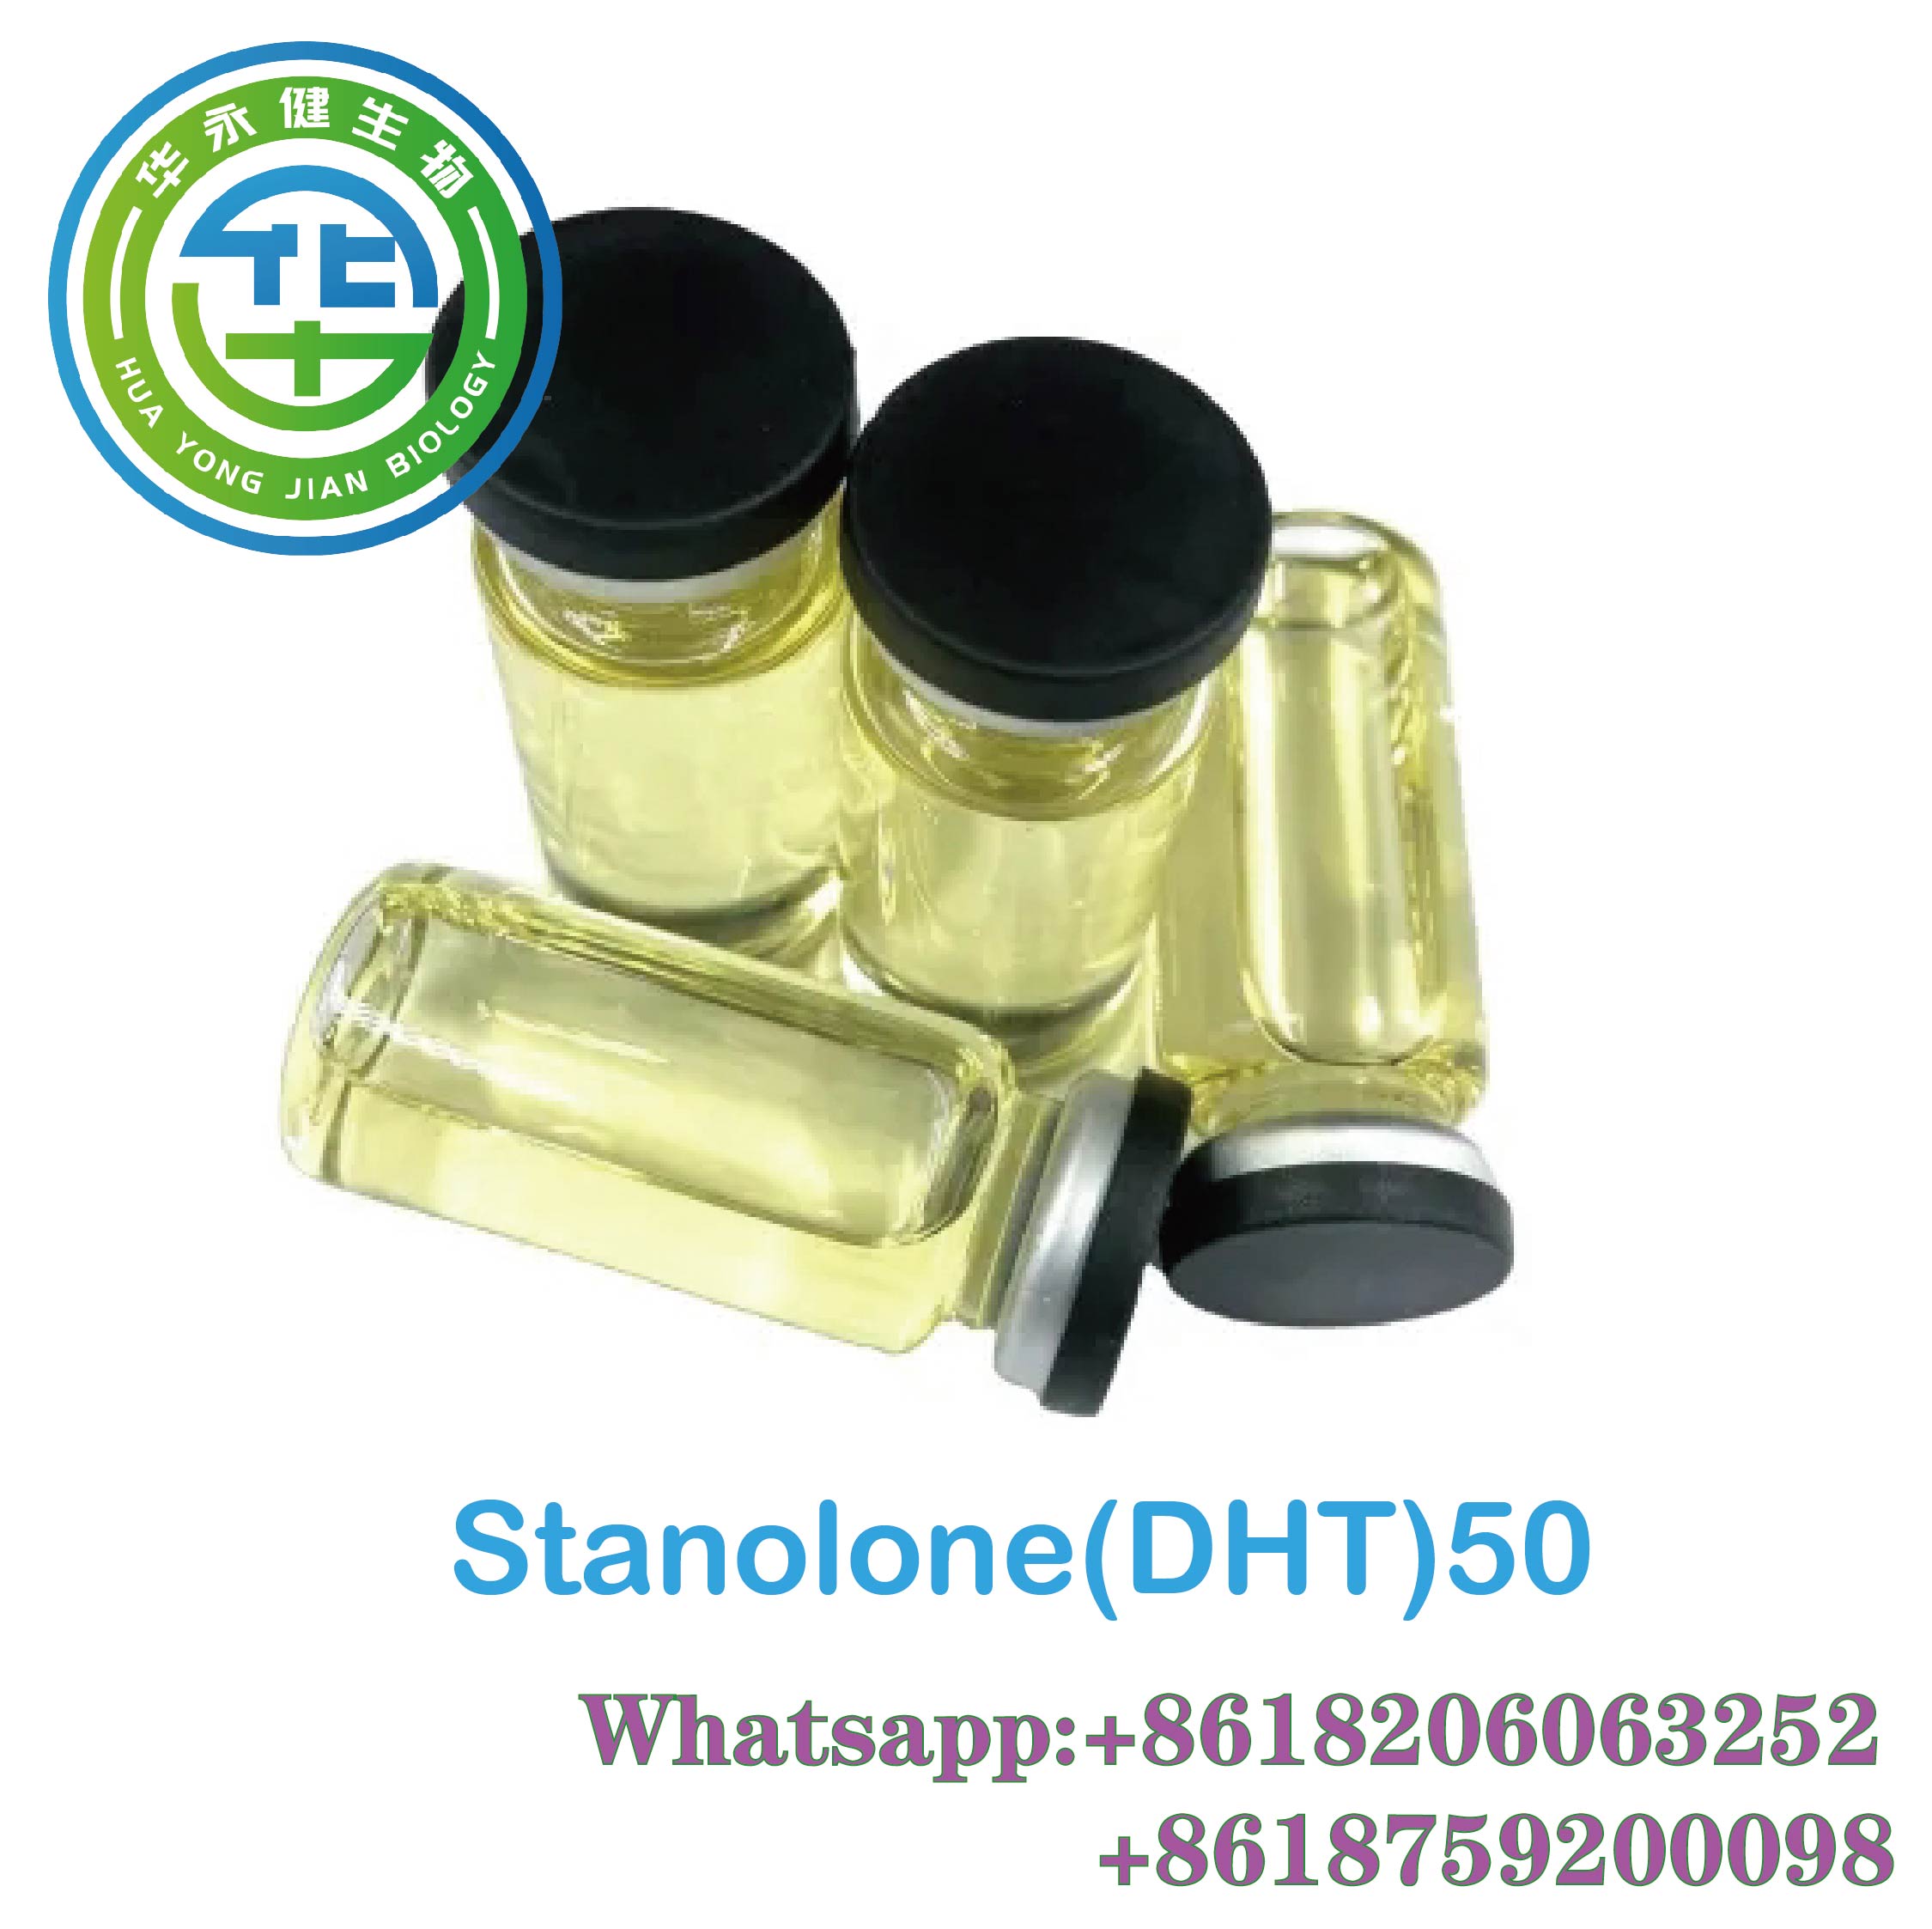 Androstanolone Stanolone 50 Prohormone Raw Powder Anabolic Steroid DHT 50mg/ml Oil